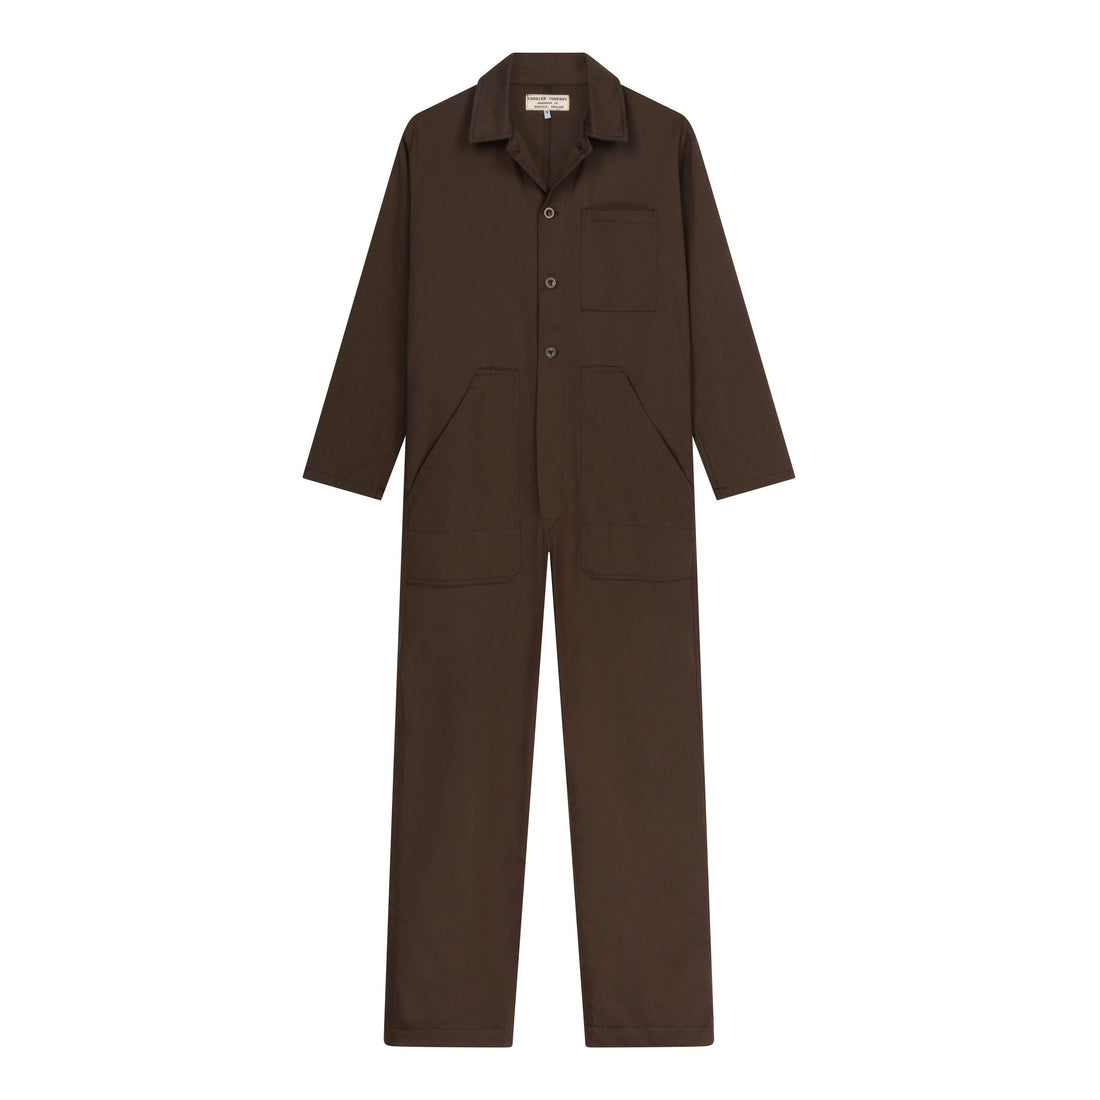 The Boiler Suit – Carrier Company